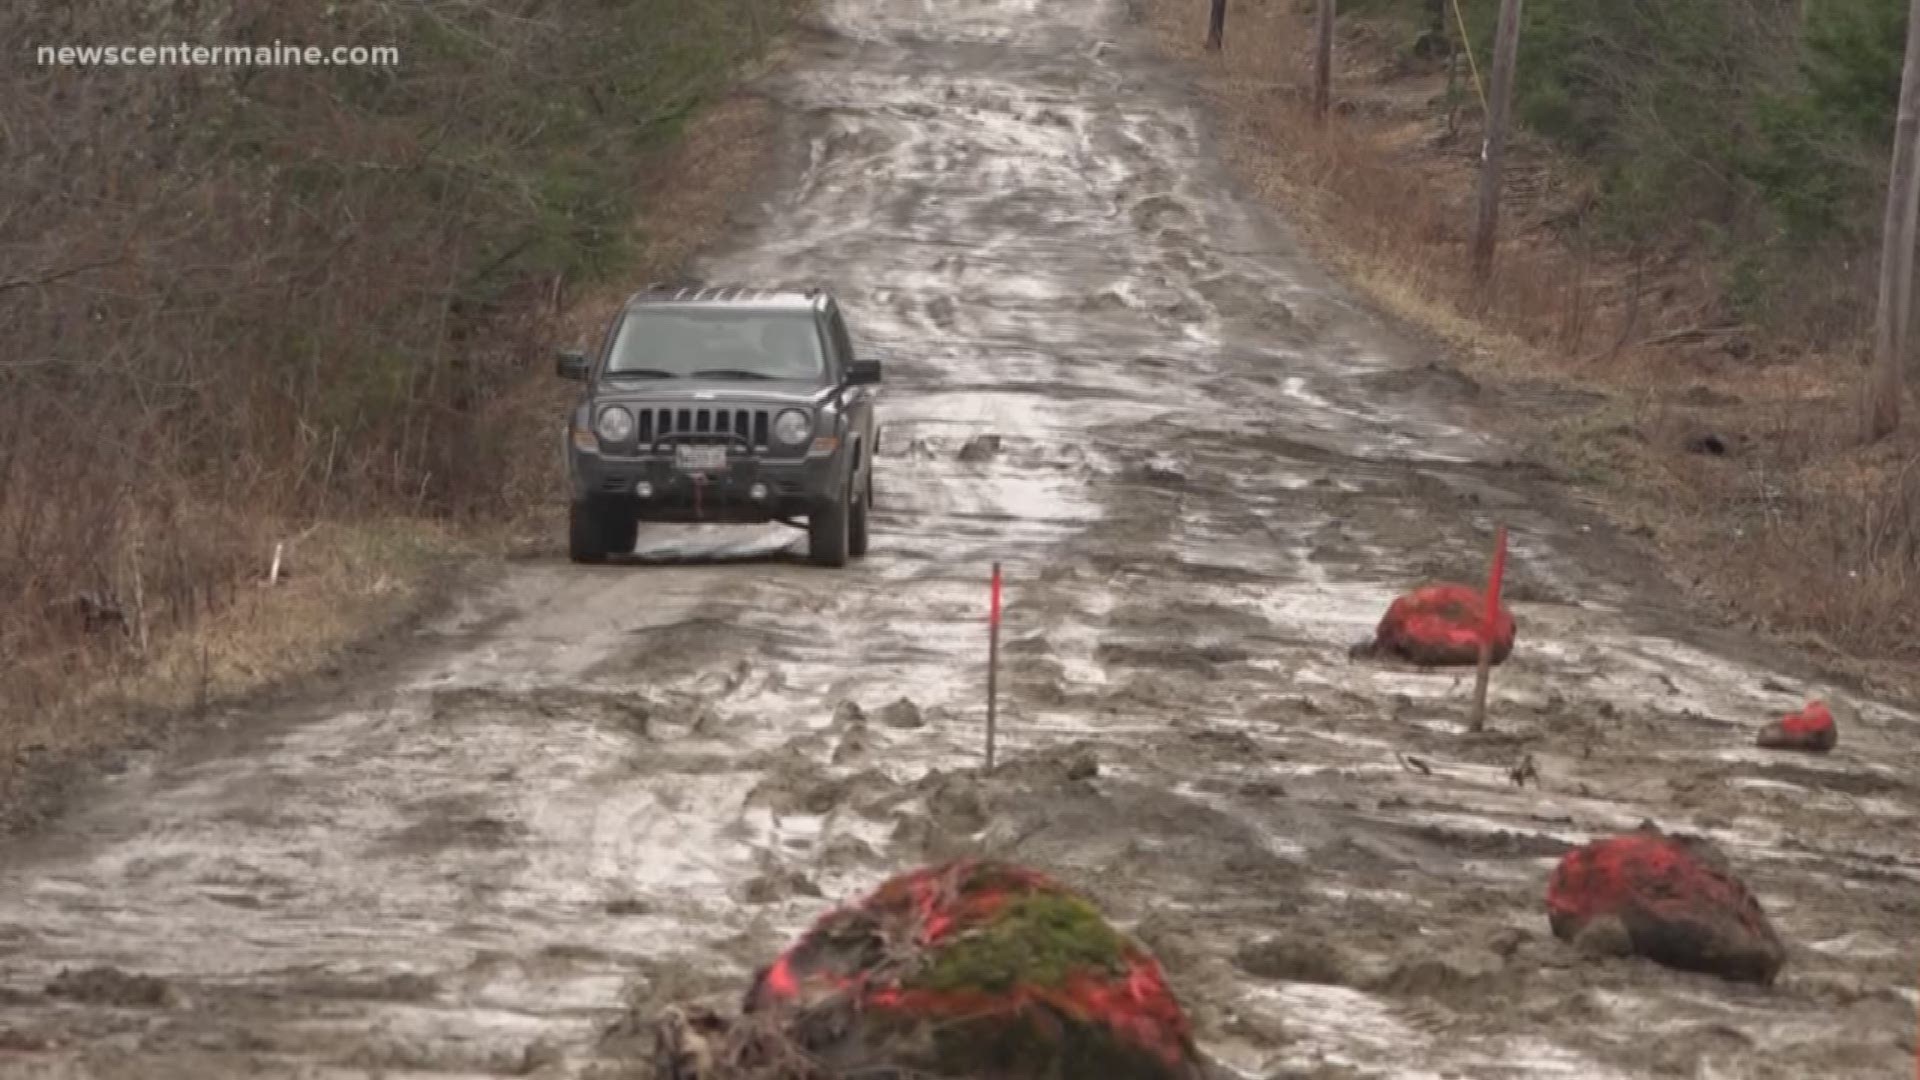 Glenburn road residents have to park at the end of their street due to mud conditions.